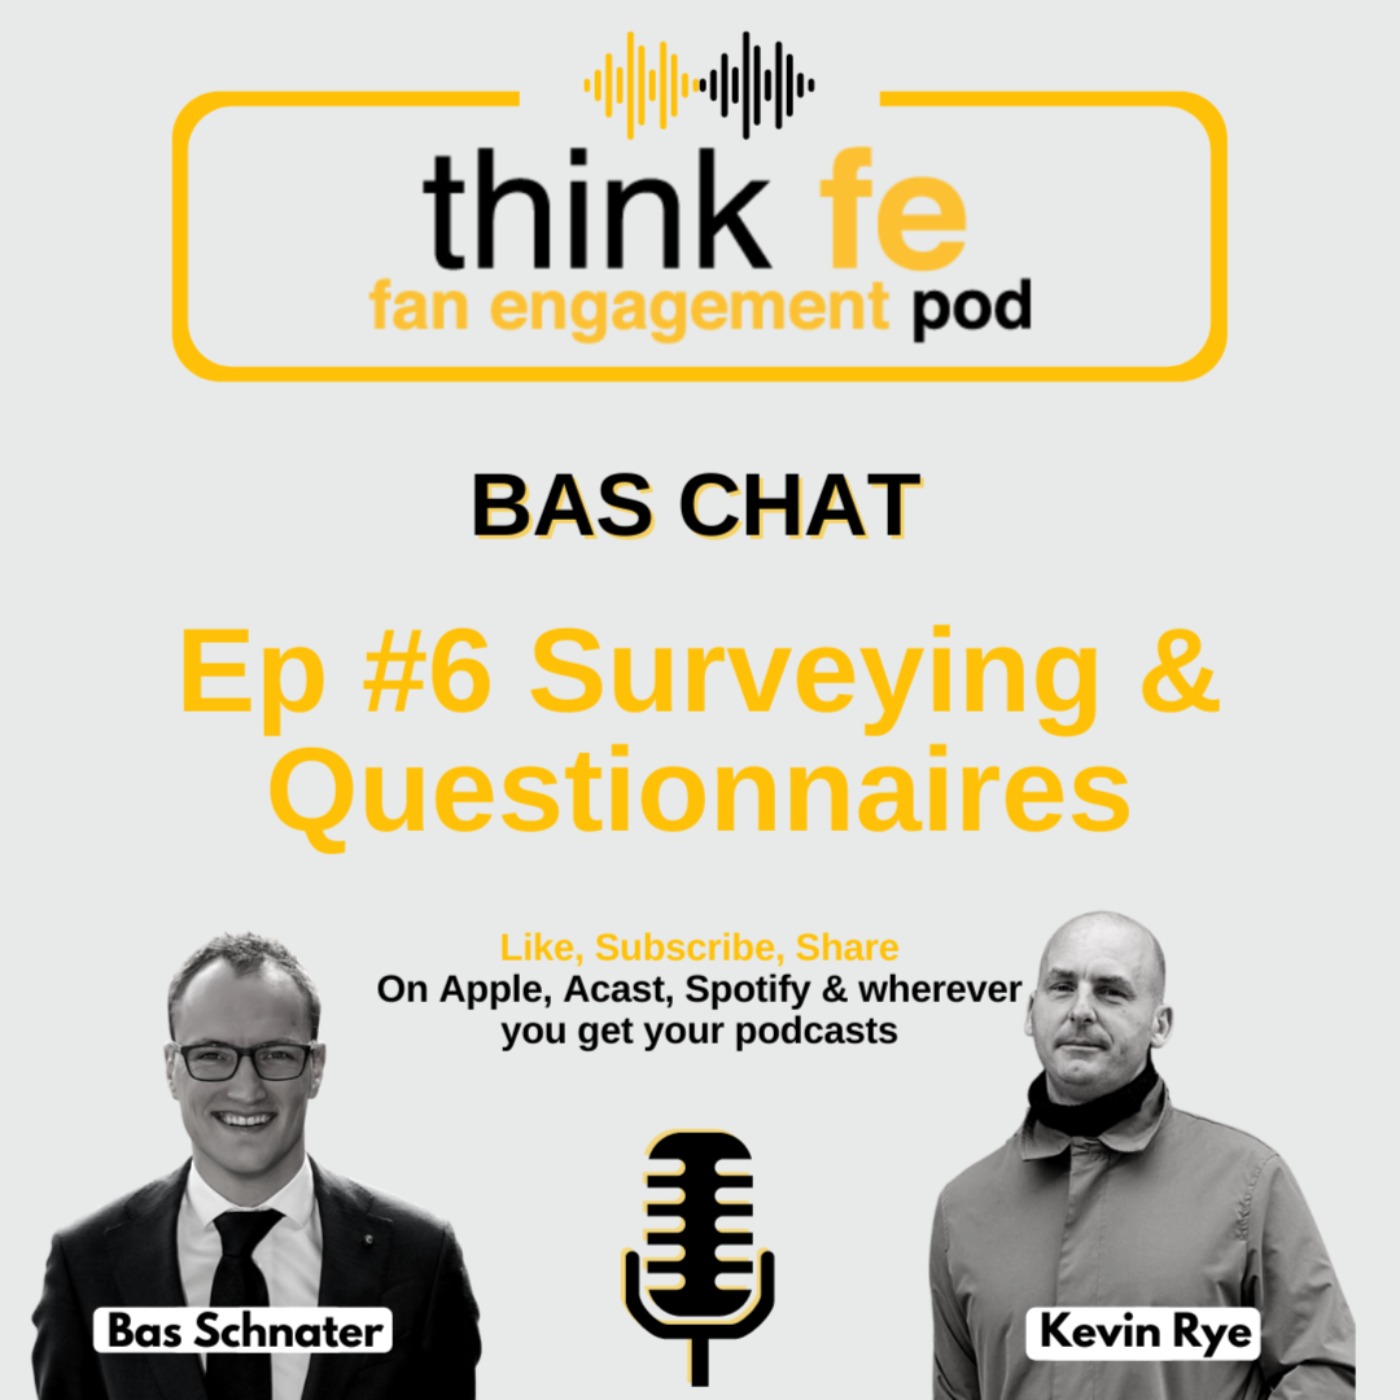 Bas Chat #6 Surveying & Questionnaires